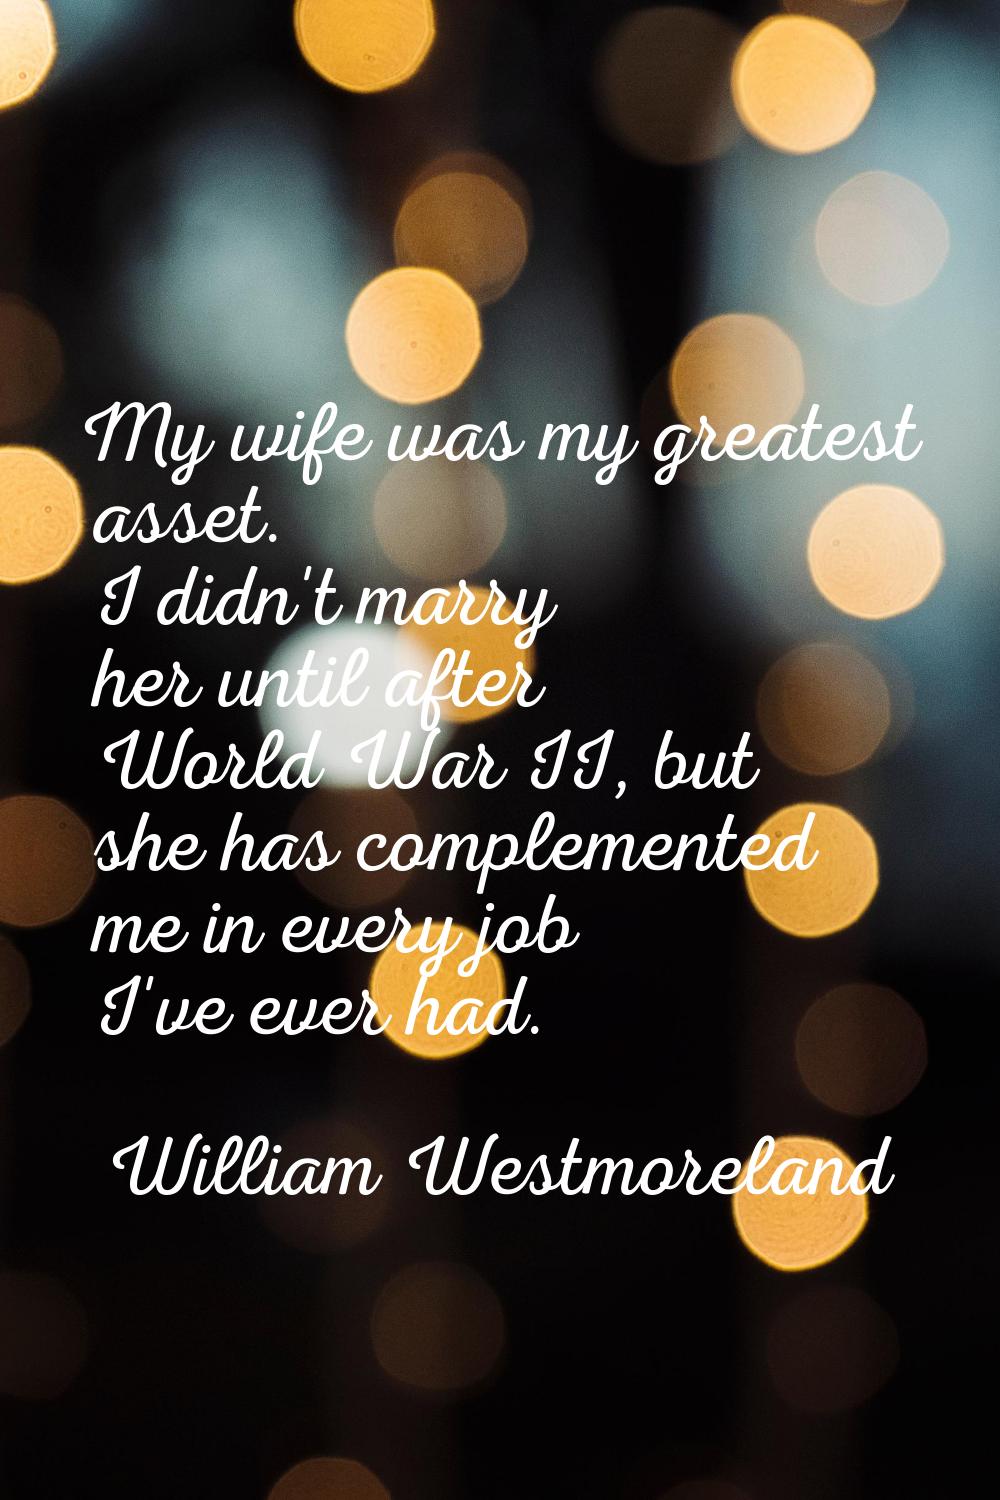 My wife was my greatest asset. I didn't marry her until after World War II, but she has complemente